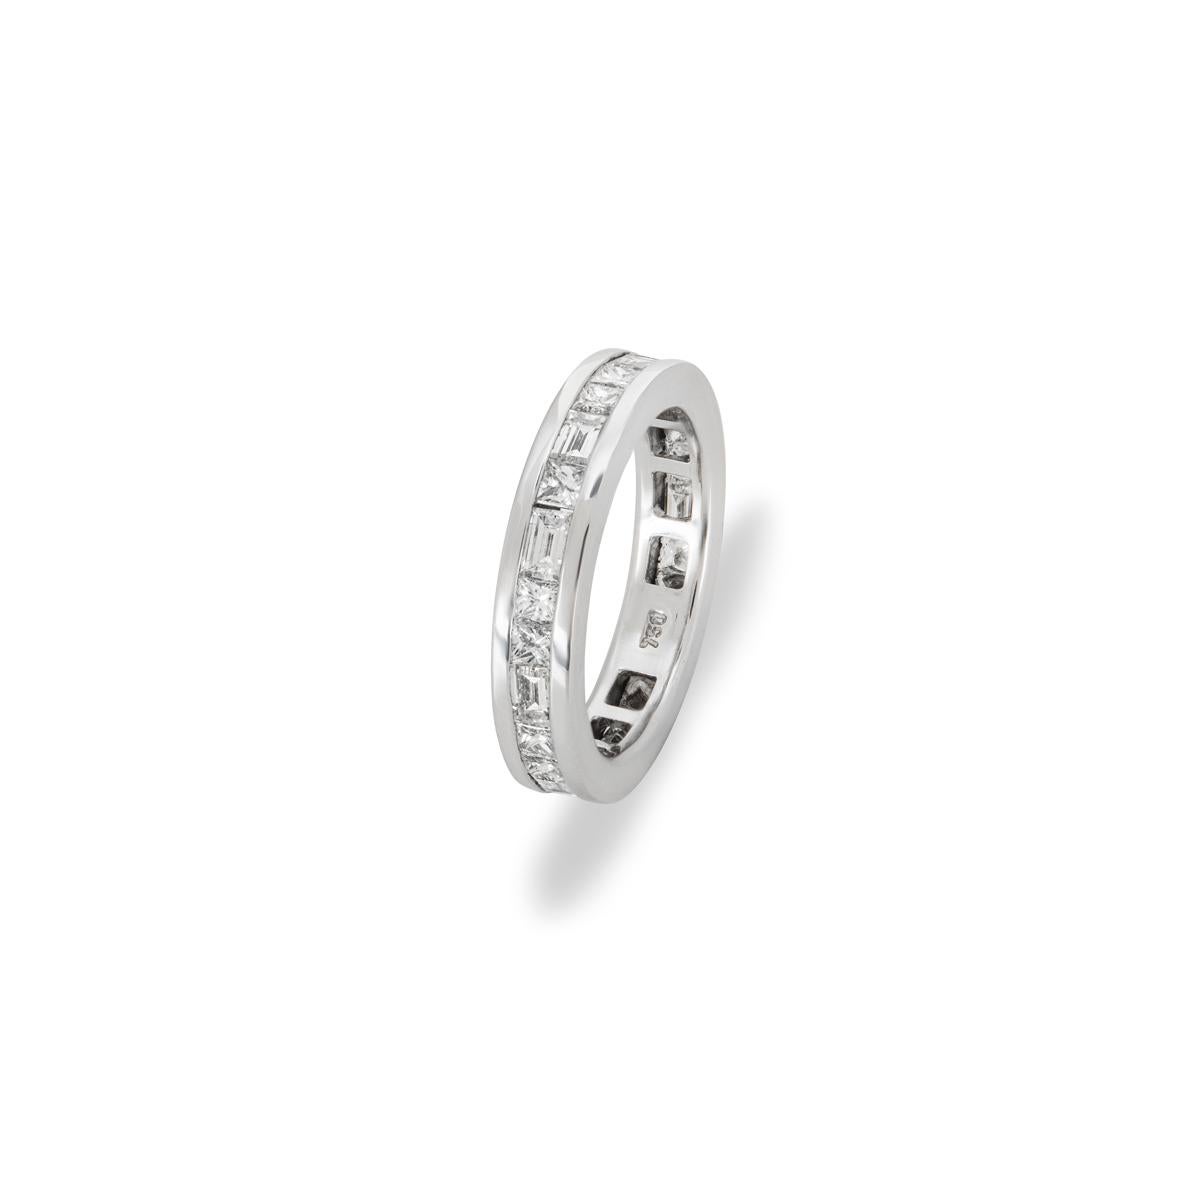 An 18k white gold diamond full eternity ring. The ring comprises of 18 princess cut and 9 baguette cut diamonds in a full eternity channel setting. The princess cut diamonds have an approximate weight of 1.80ct and the baguette cut diamonds have an